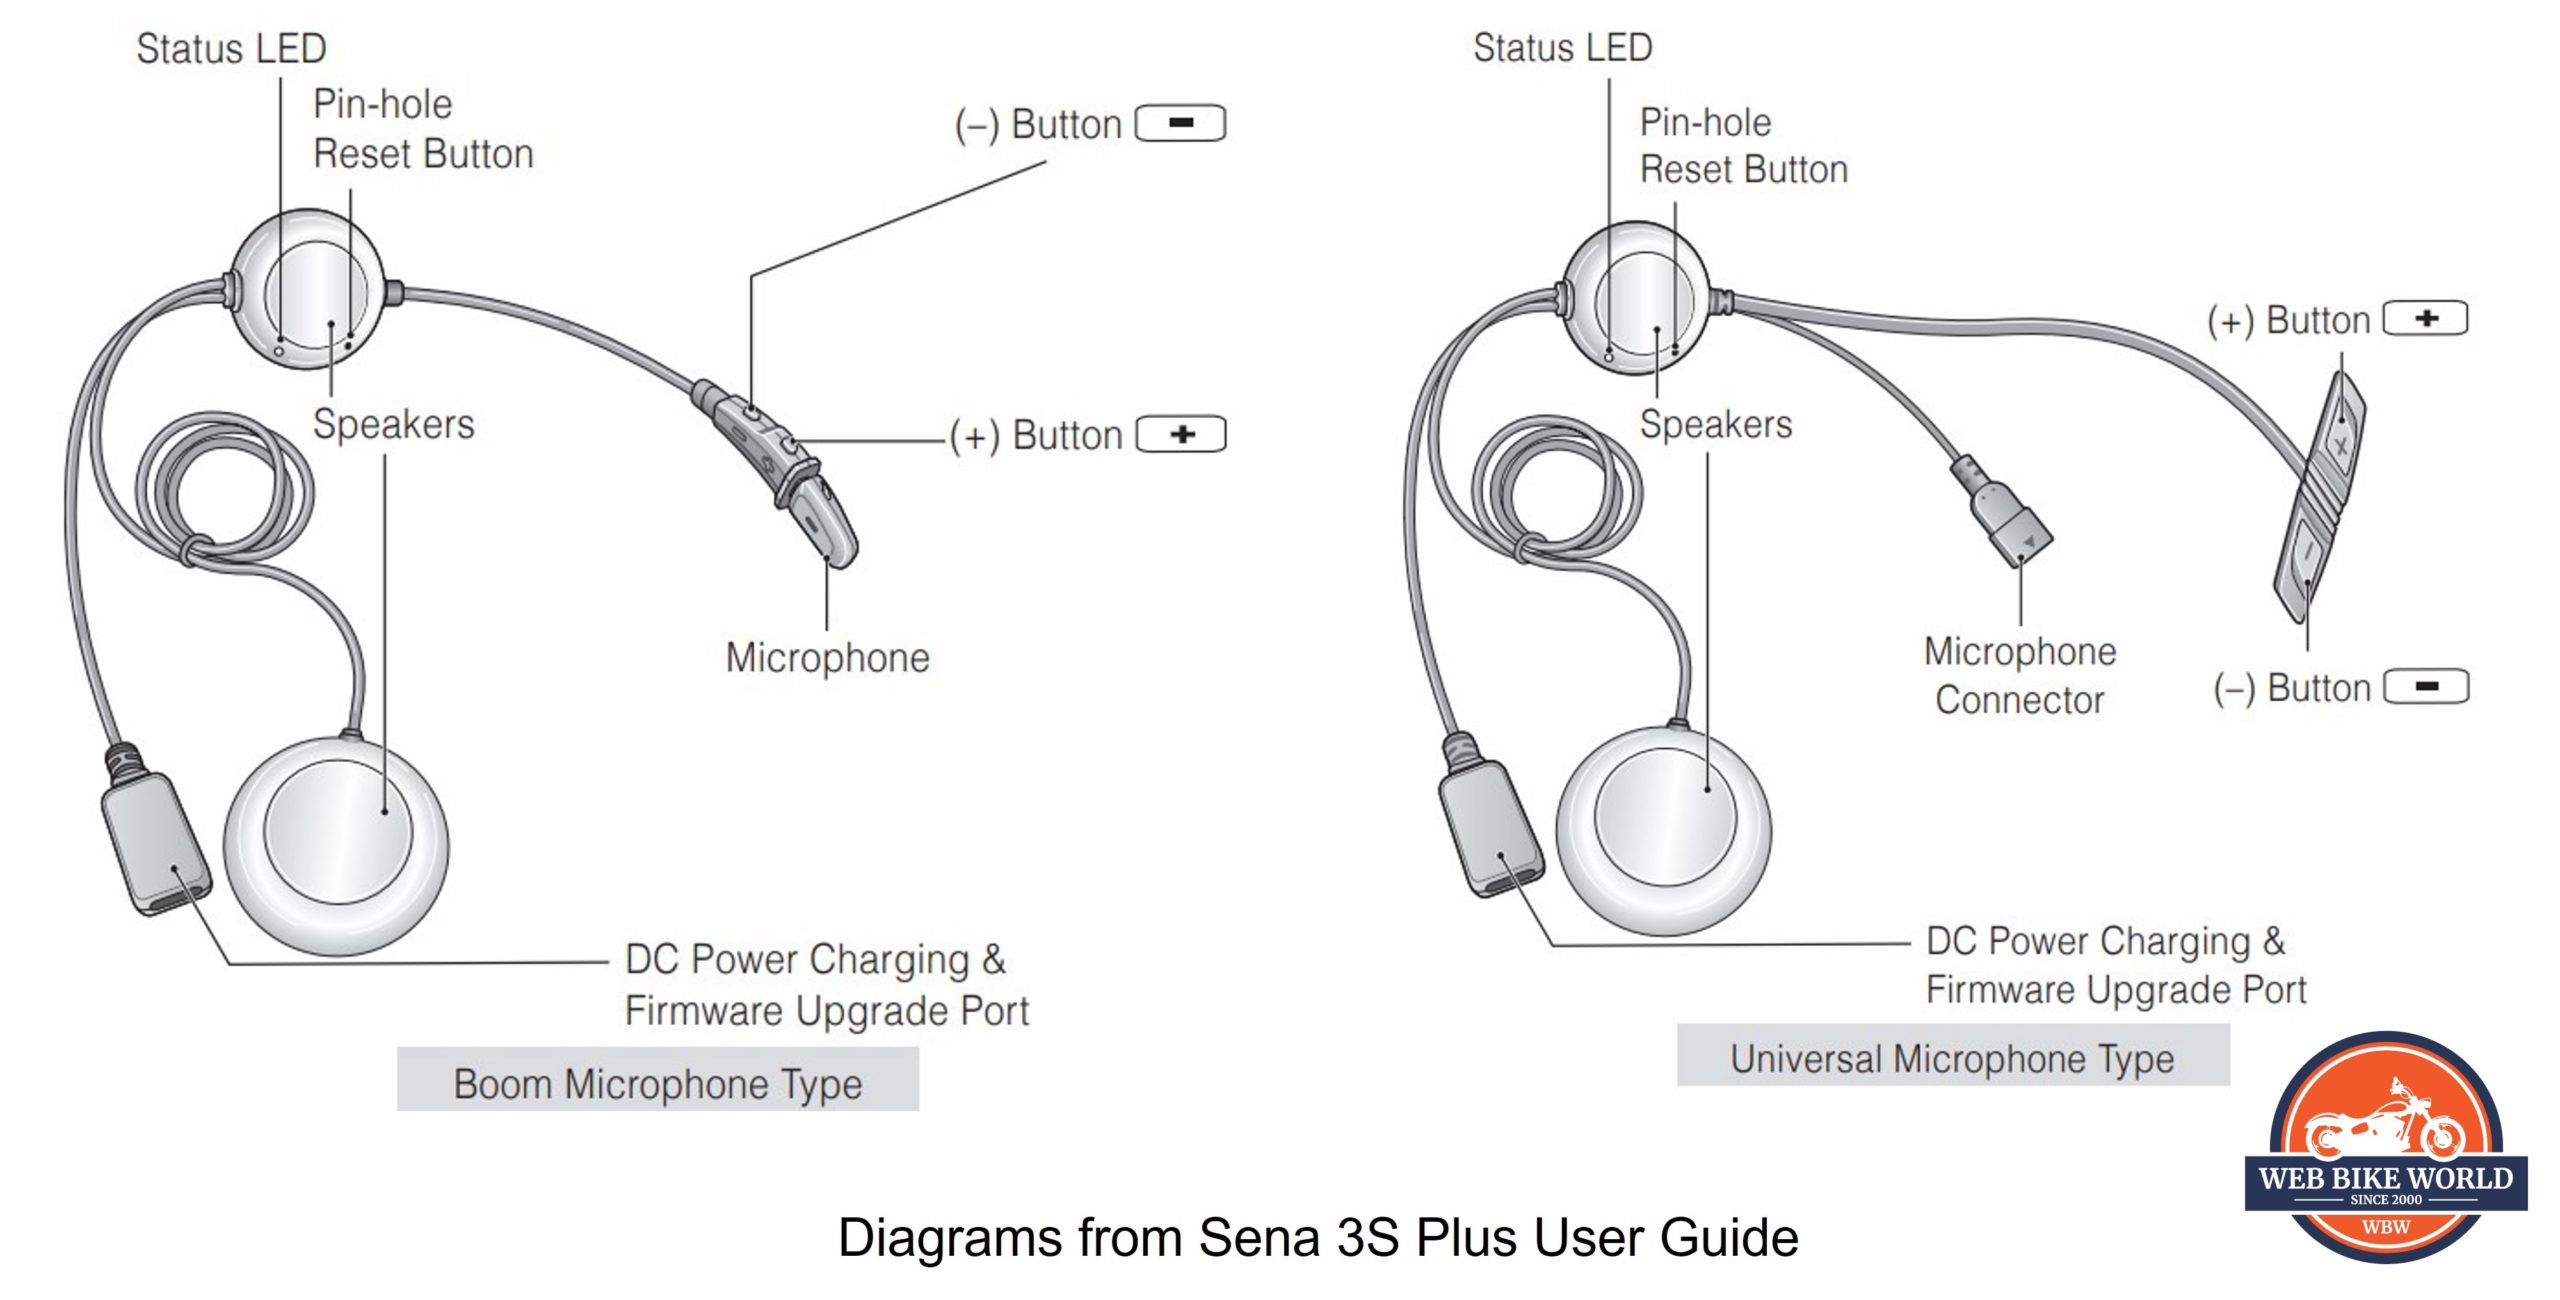 Sena 3S Plus, Boom and Universal Systems, Composite Layout